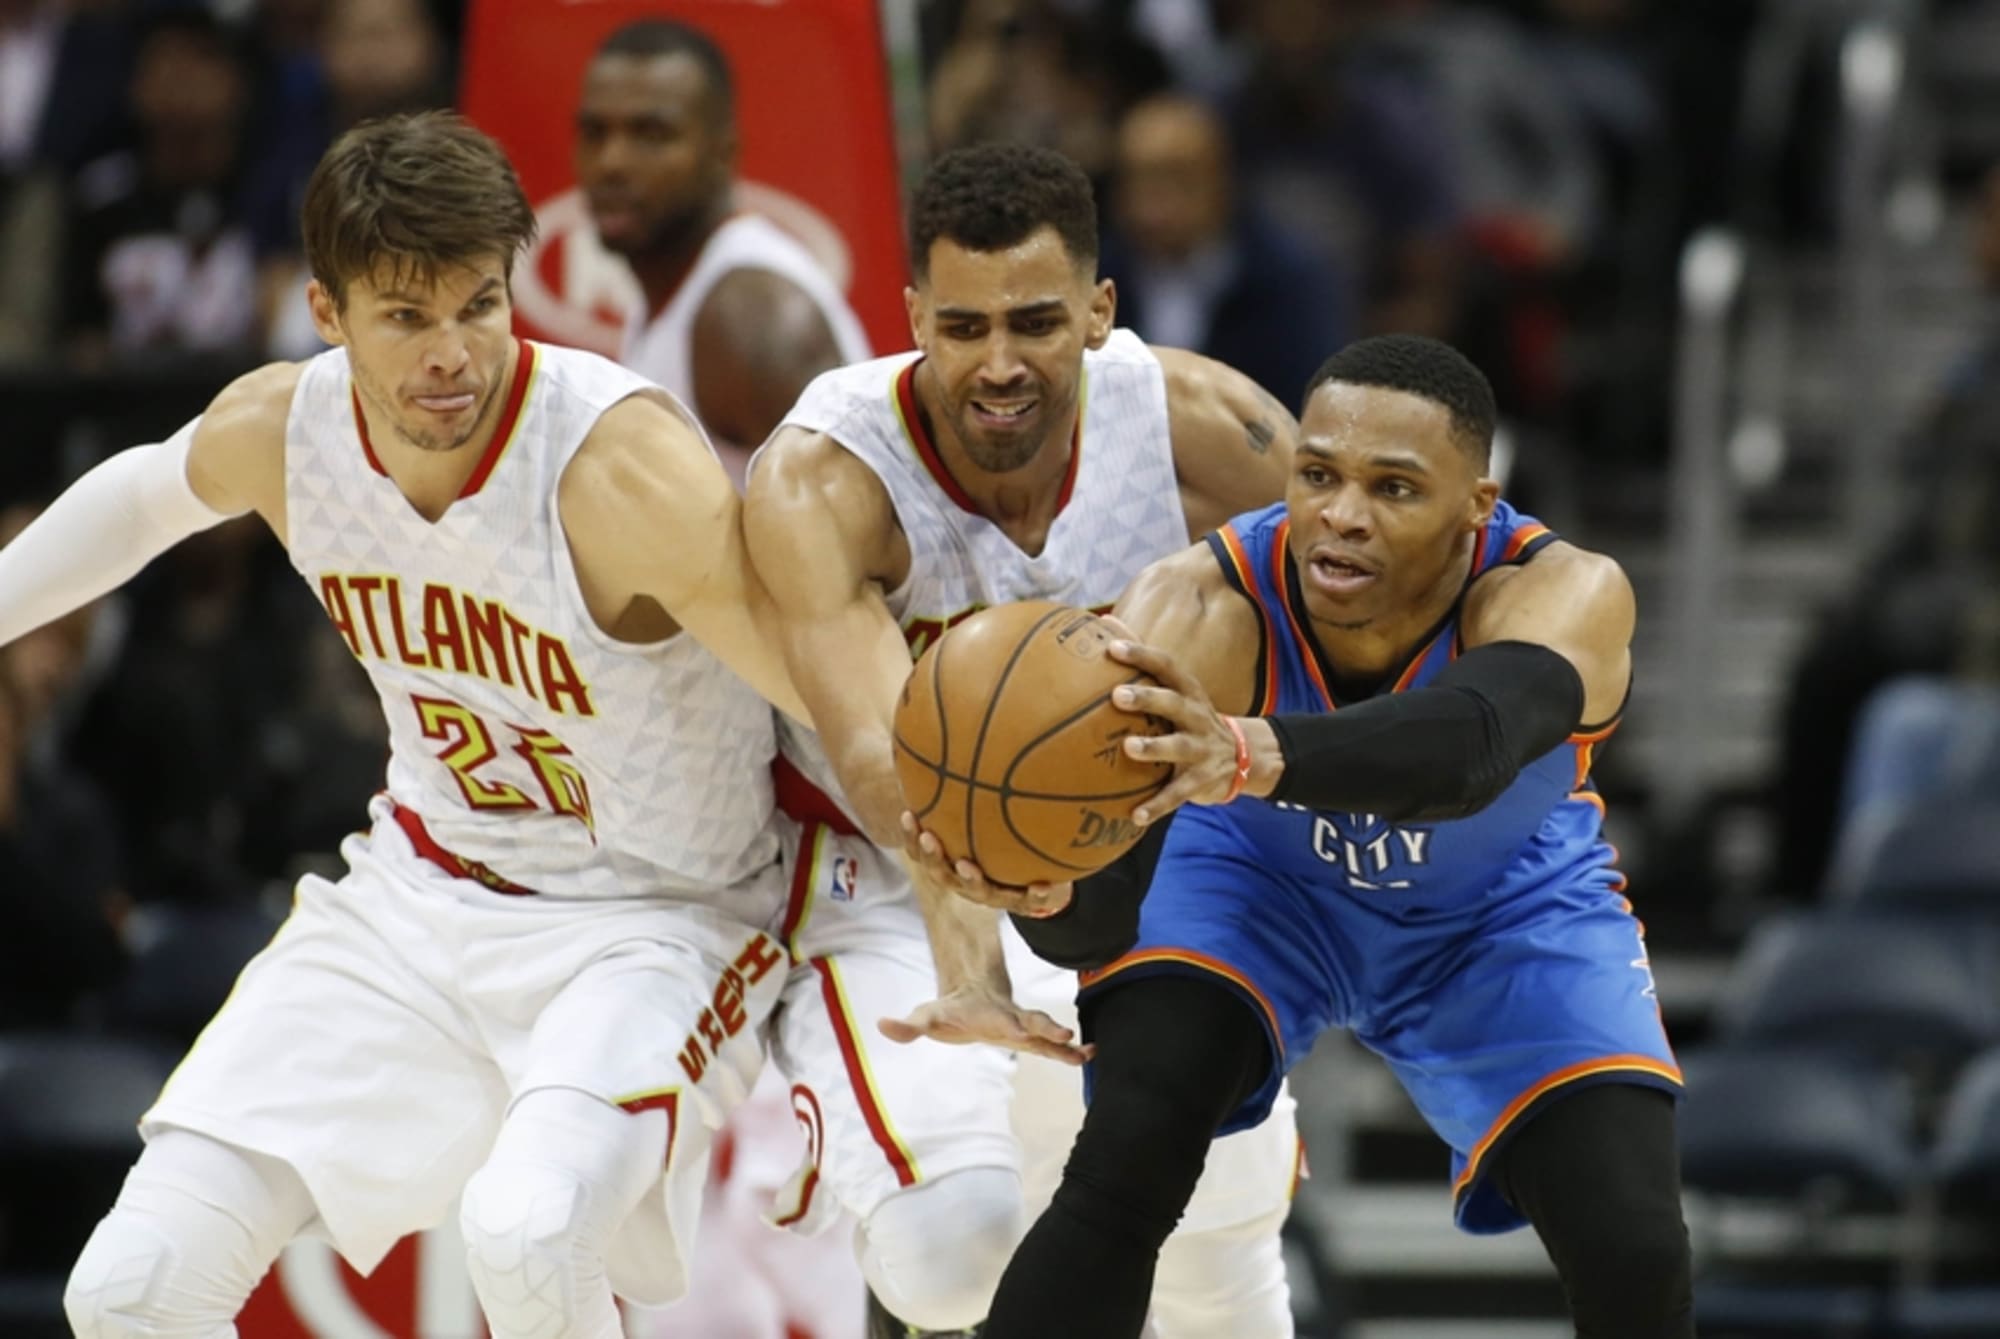 Hawks at Thunder live stream How to watch online